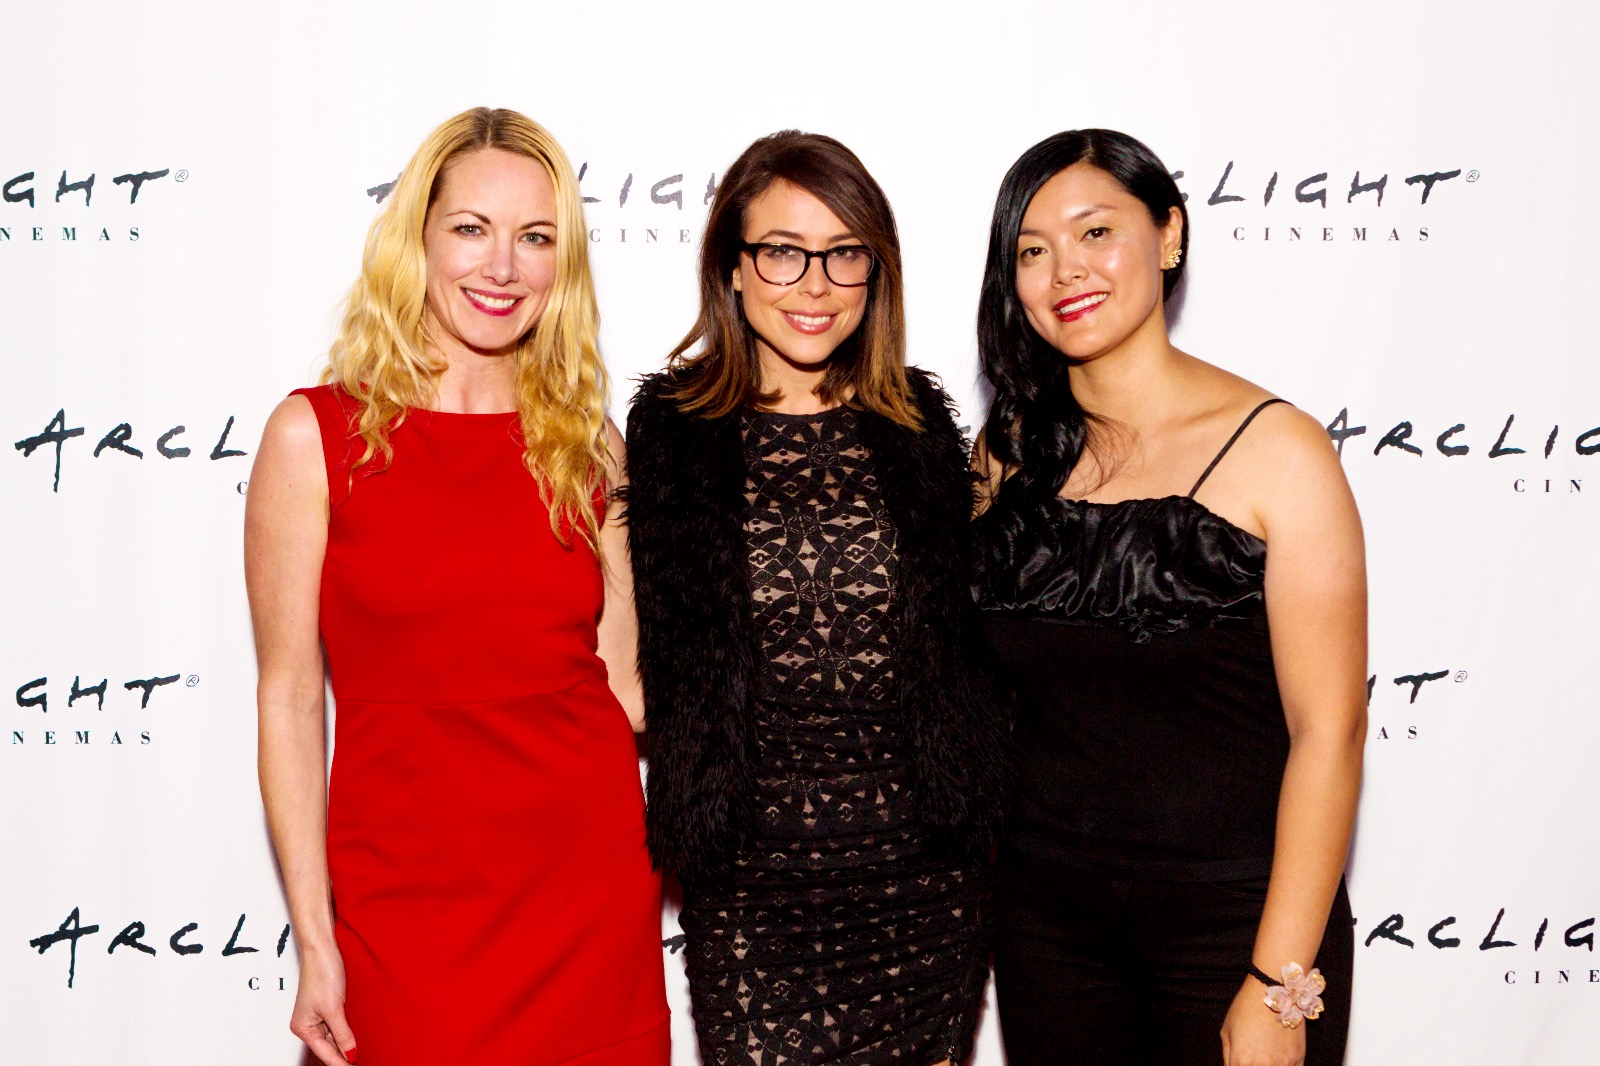 With Shira Lazar and Jennie Kong at Female Filmmakers Showcase